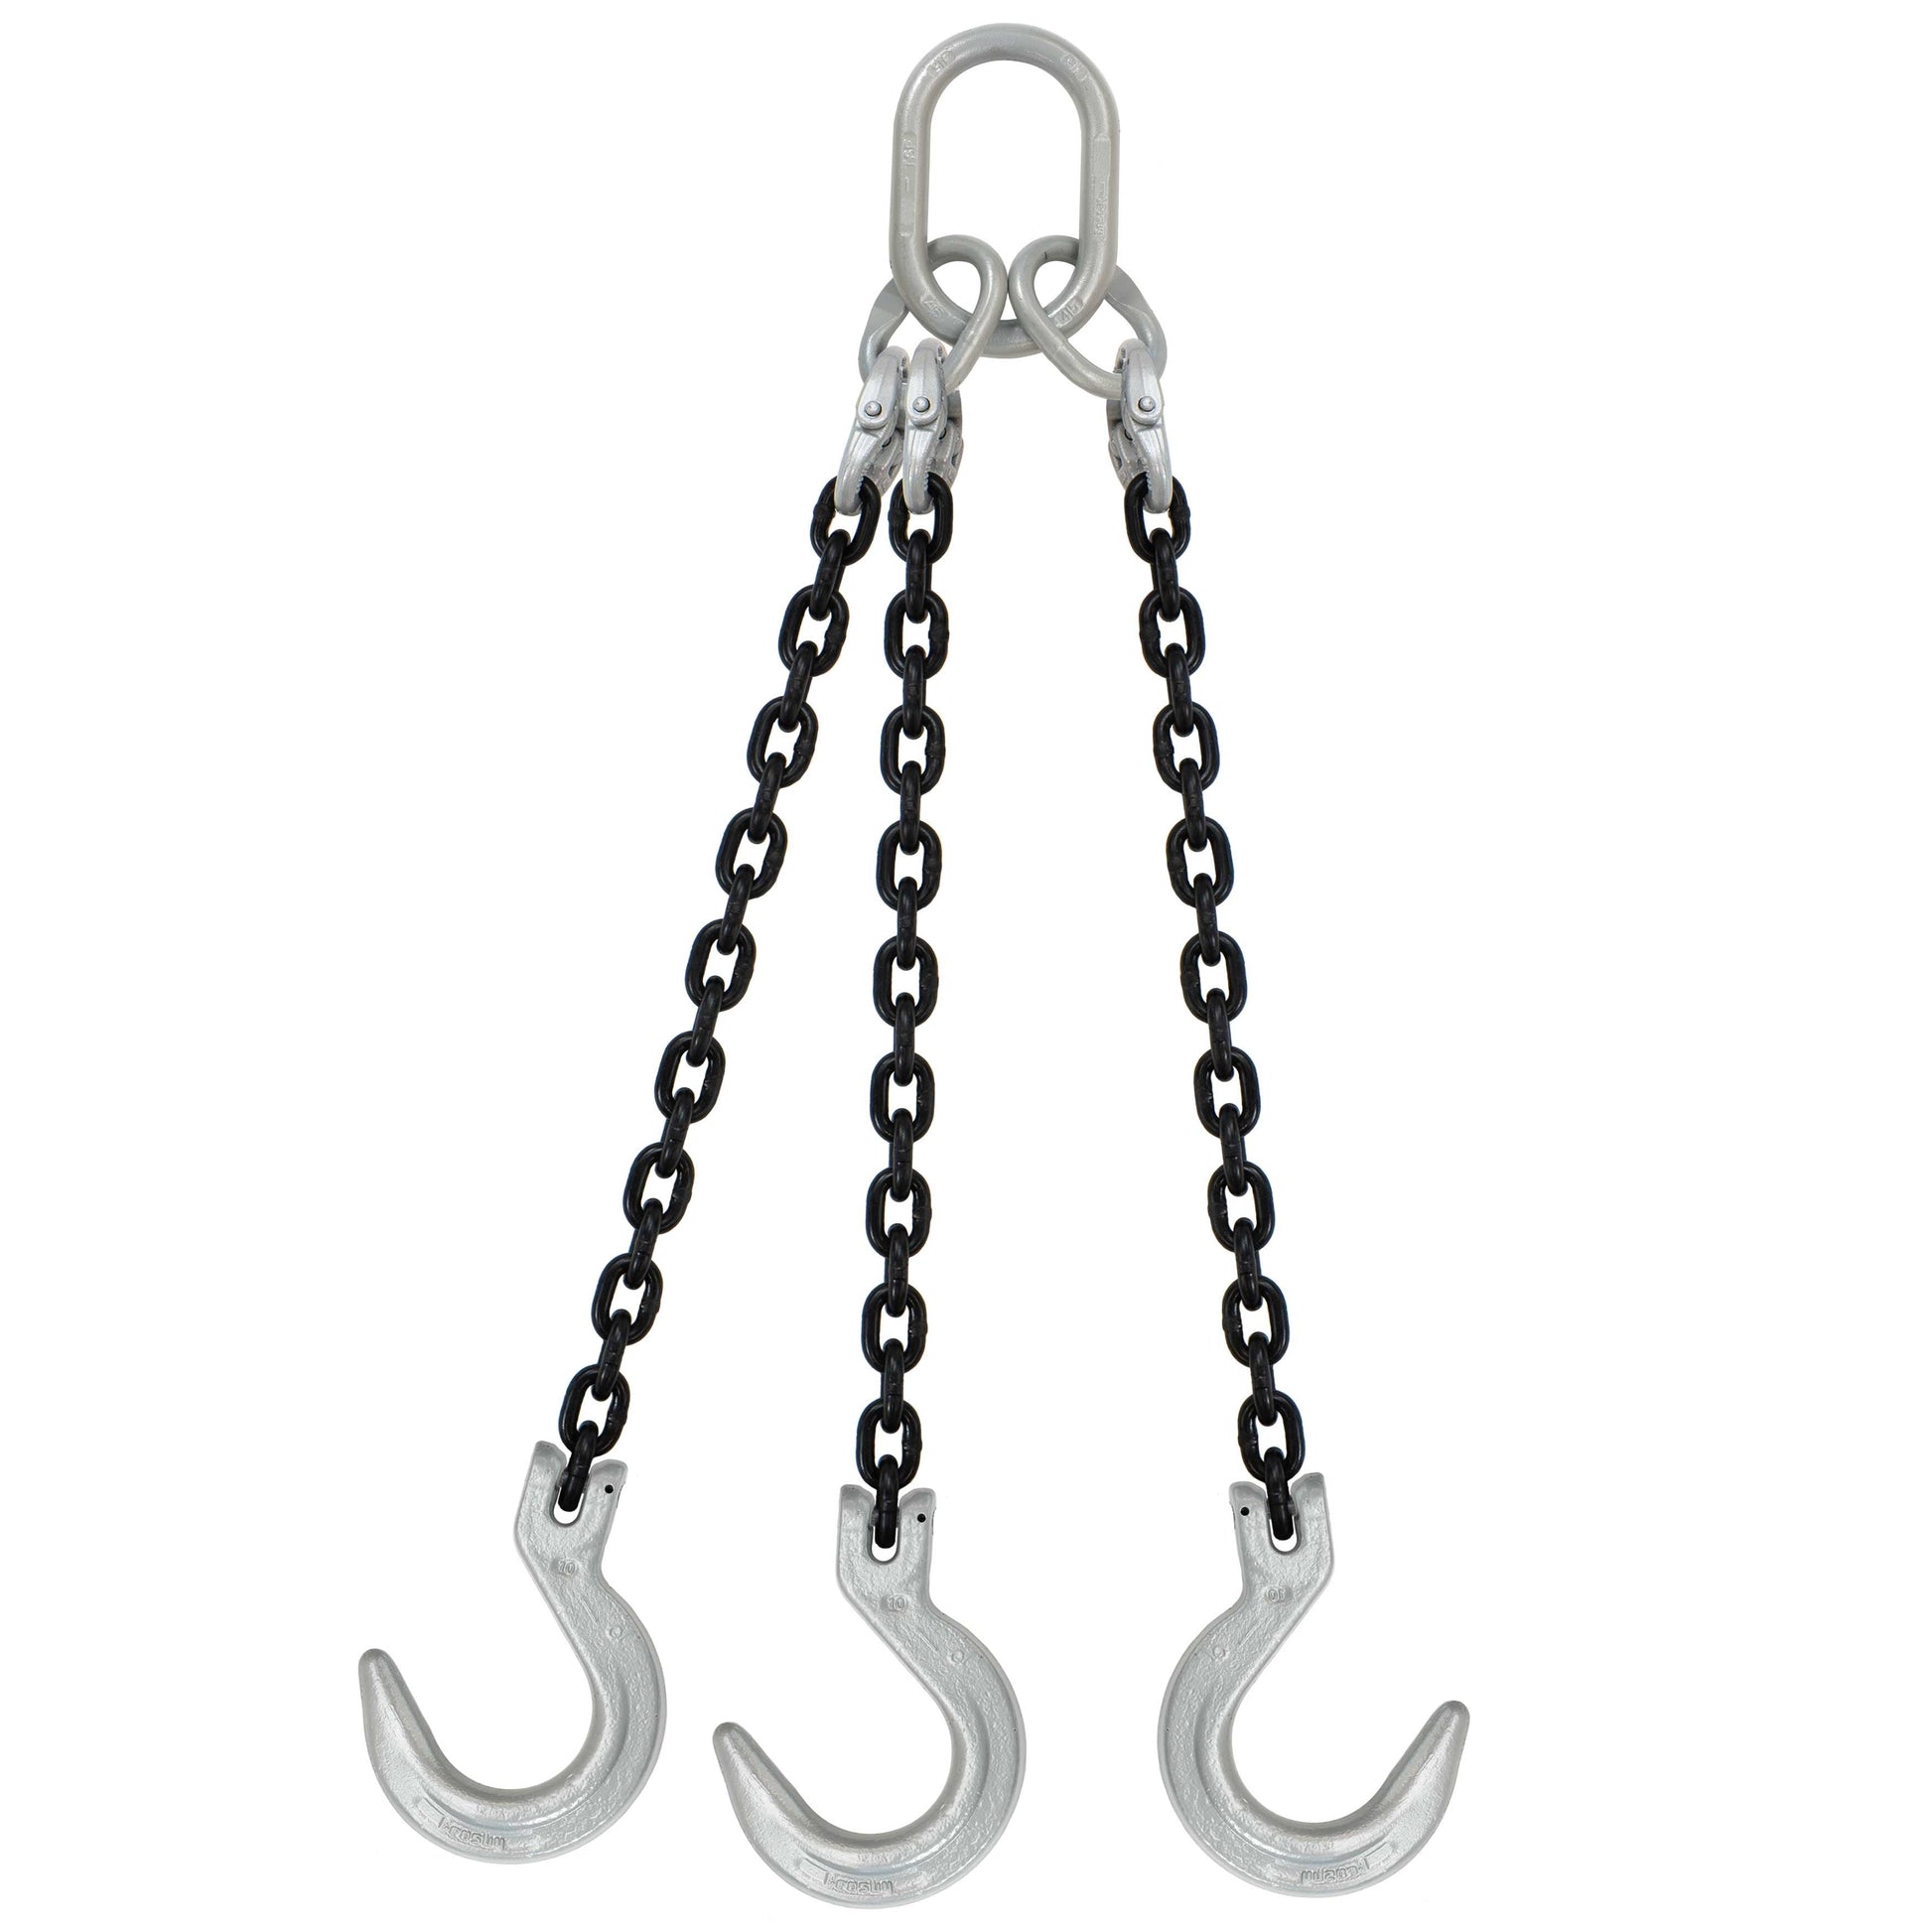 12 inch x 20 foot Domestic 3 Leg Chain Sling w Crosby Foundry Hooks Grade 100 image 1 of 2